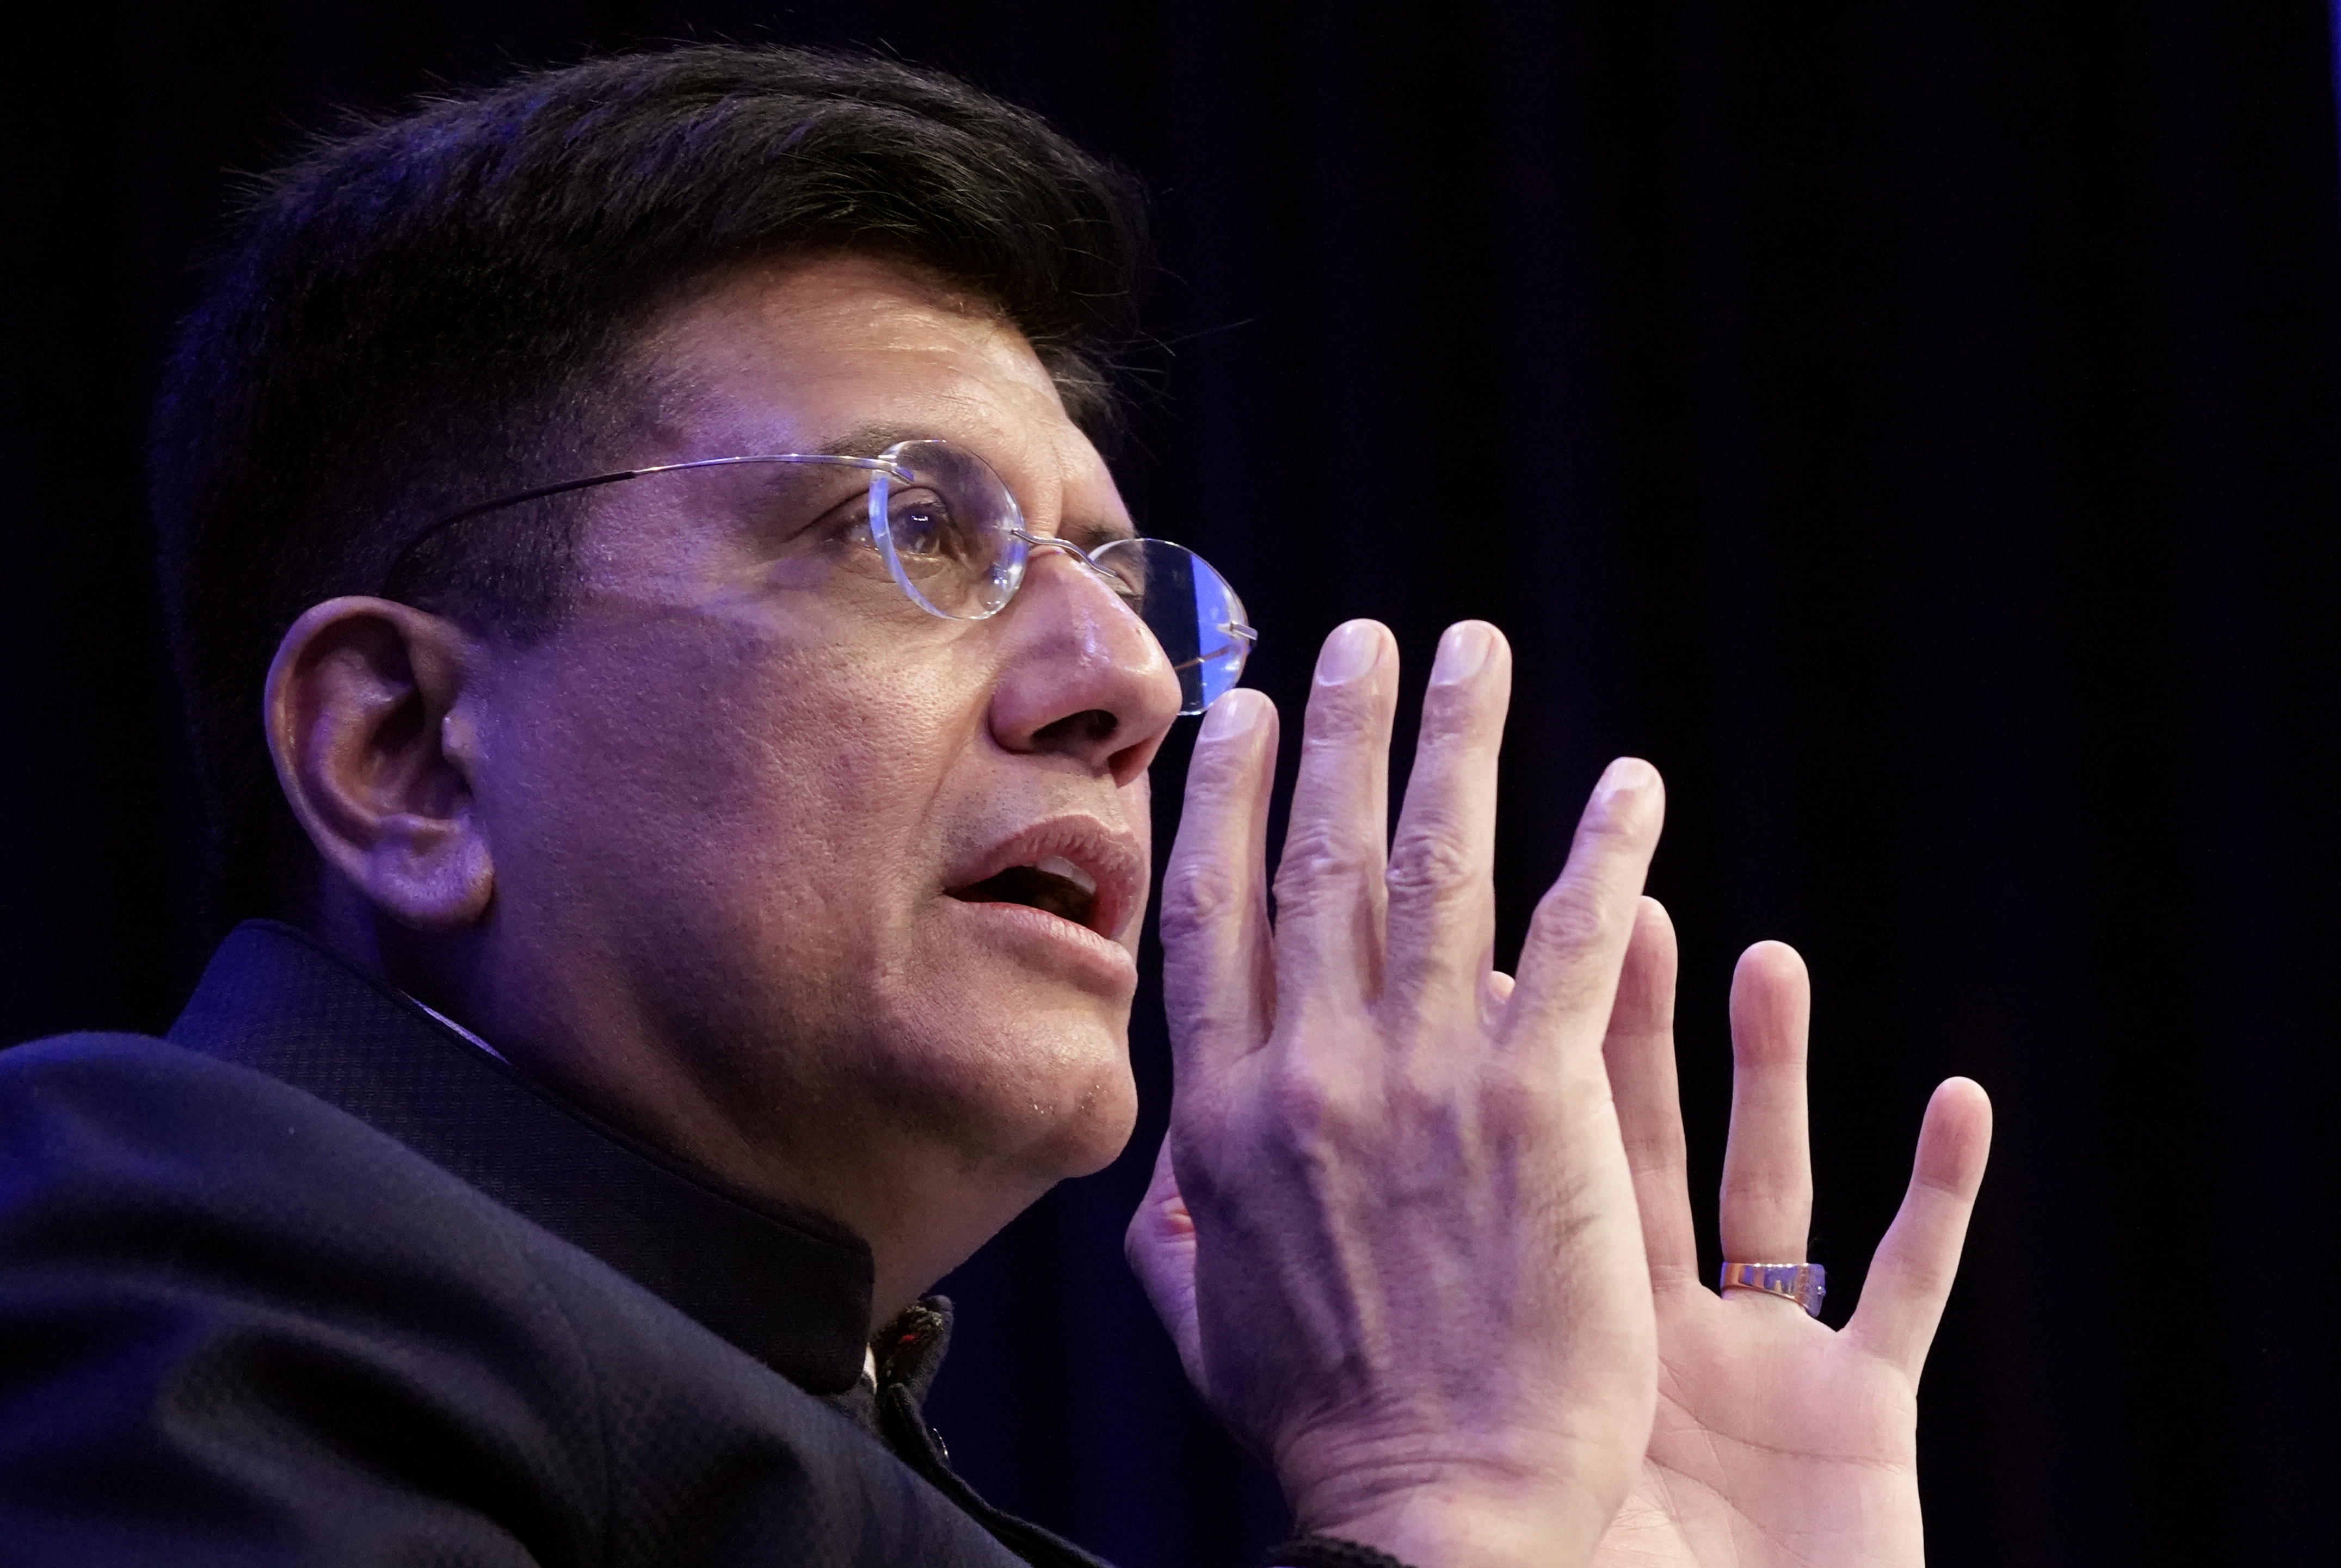 Piyush Goyal, India's Minister of Railways and Minister of Commerce and Industry, attends a session at the 50th World Economic Forum (WEF) annual meeting in Davos